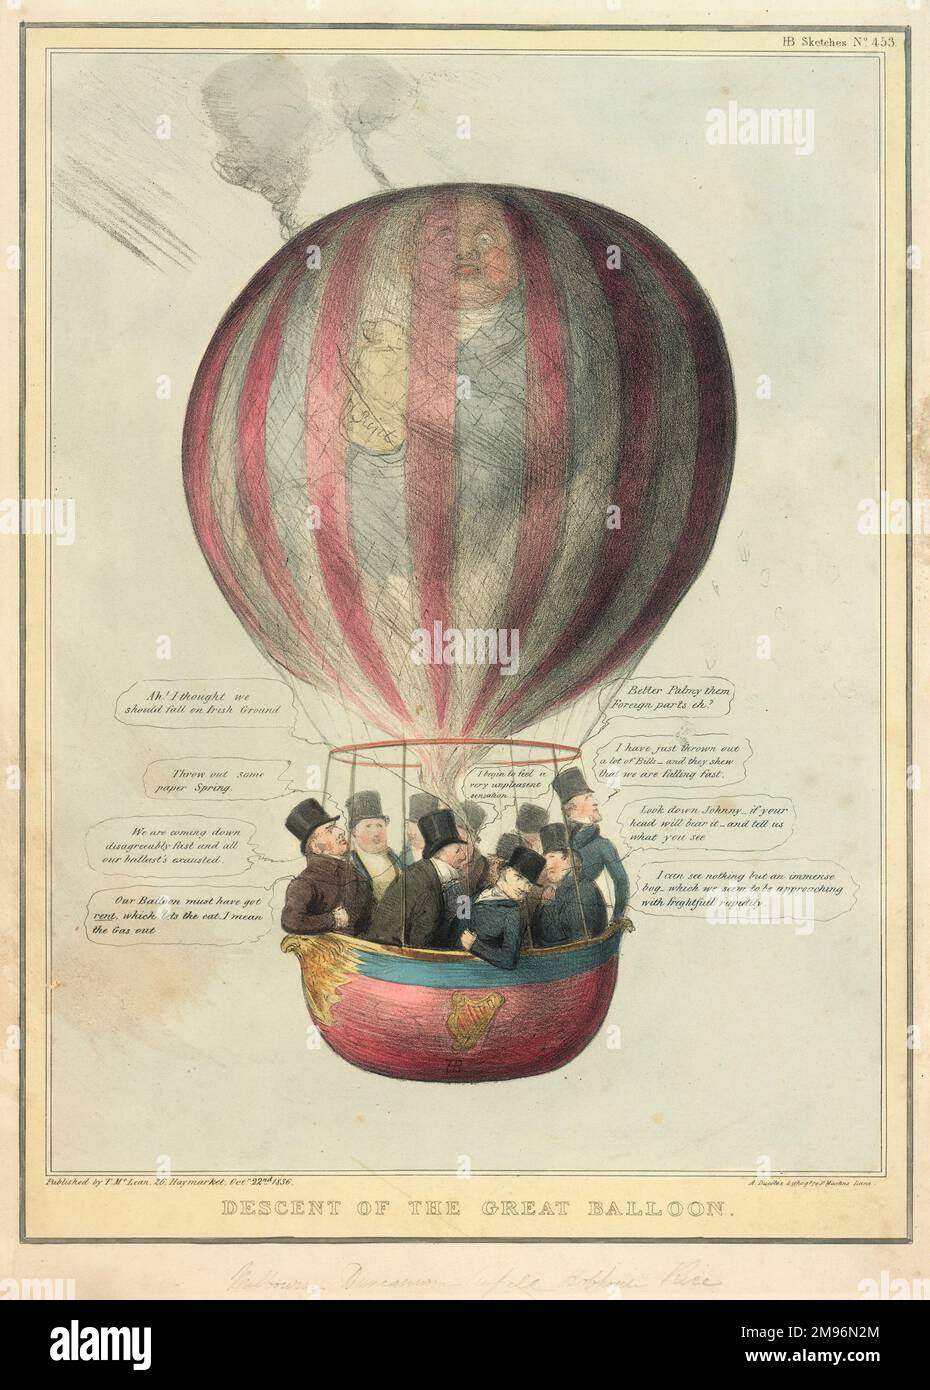 Satirical political cartoon, Descent of the Great Balloon, showing ten politicians travelling in a hot-air balloon. Speech bubbles show the men's concerns about the rapid descent of the balloon, which has developed a leak near the top -- an analogy for their political positions in relation to Ireland.  The men include Lord Melbourne, Holland, Palmerston, Duncannon, Russell, John Cam Hobhouse, and Thomas Spring Rice.  The plump man whose fading image can be seen on the balloon is the Irish politician Daniel O'Connell, whose support they have benefited from, but whose popularity is now declini Stock Photo